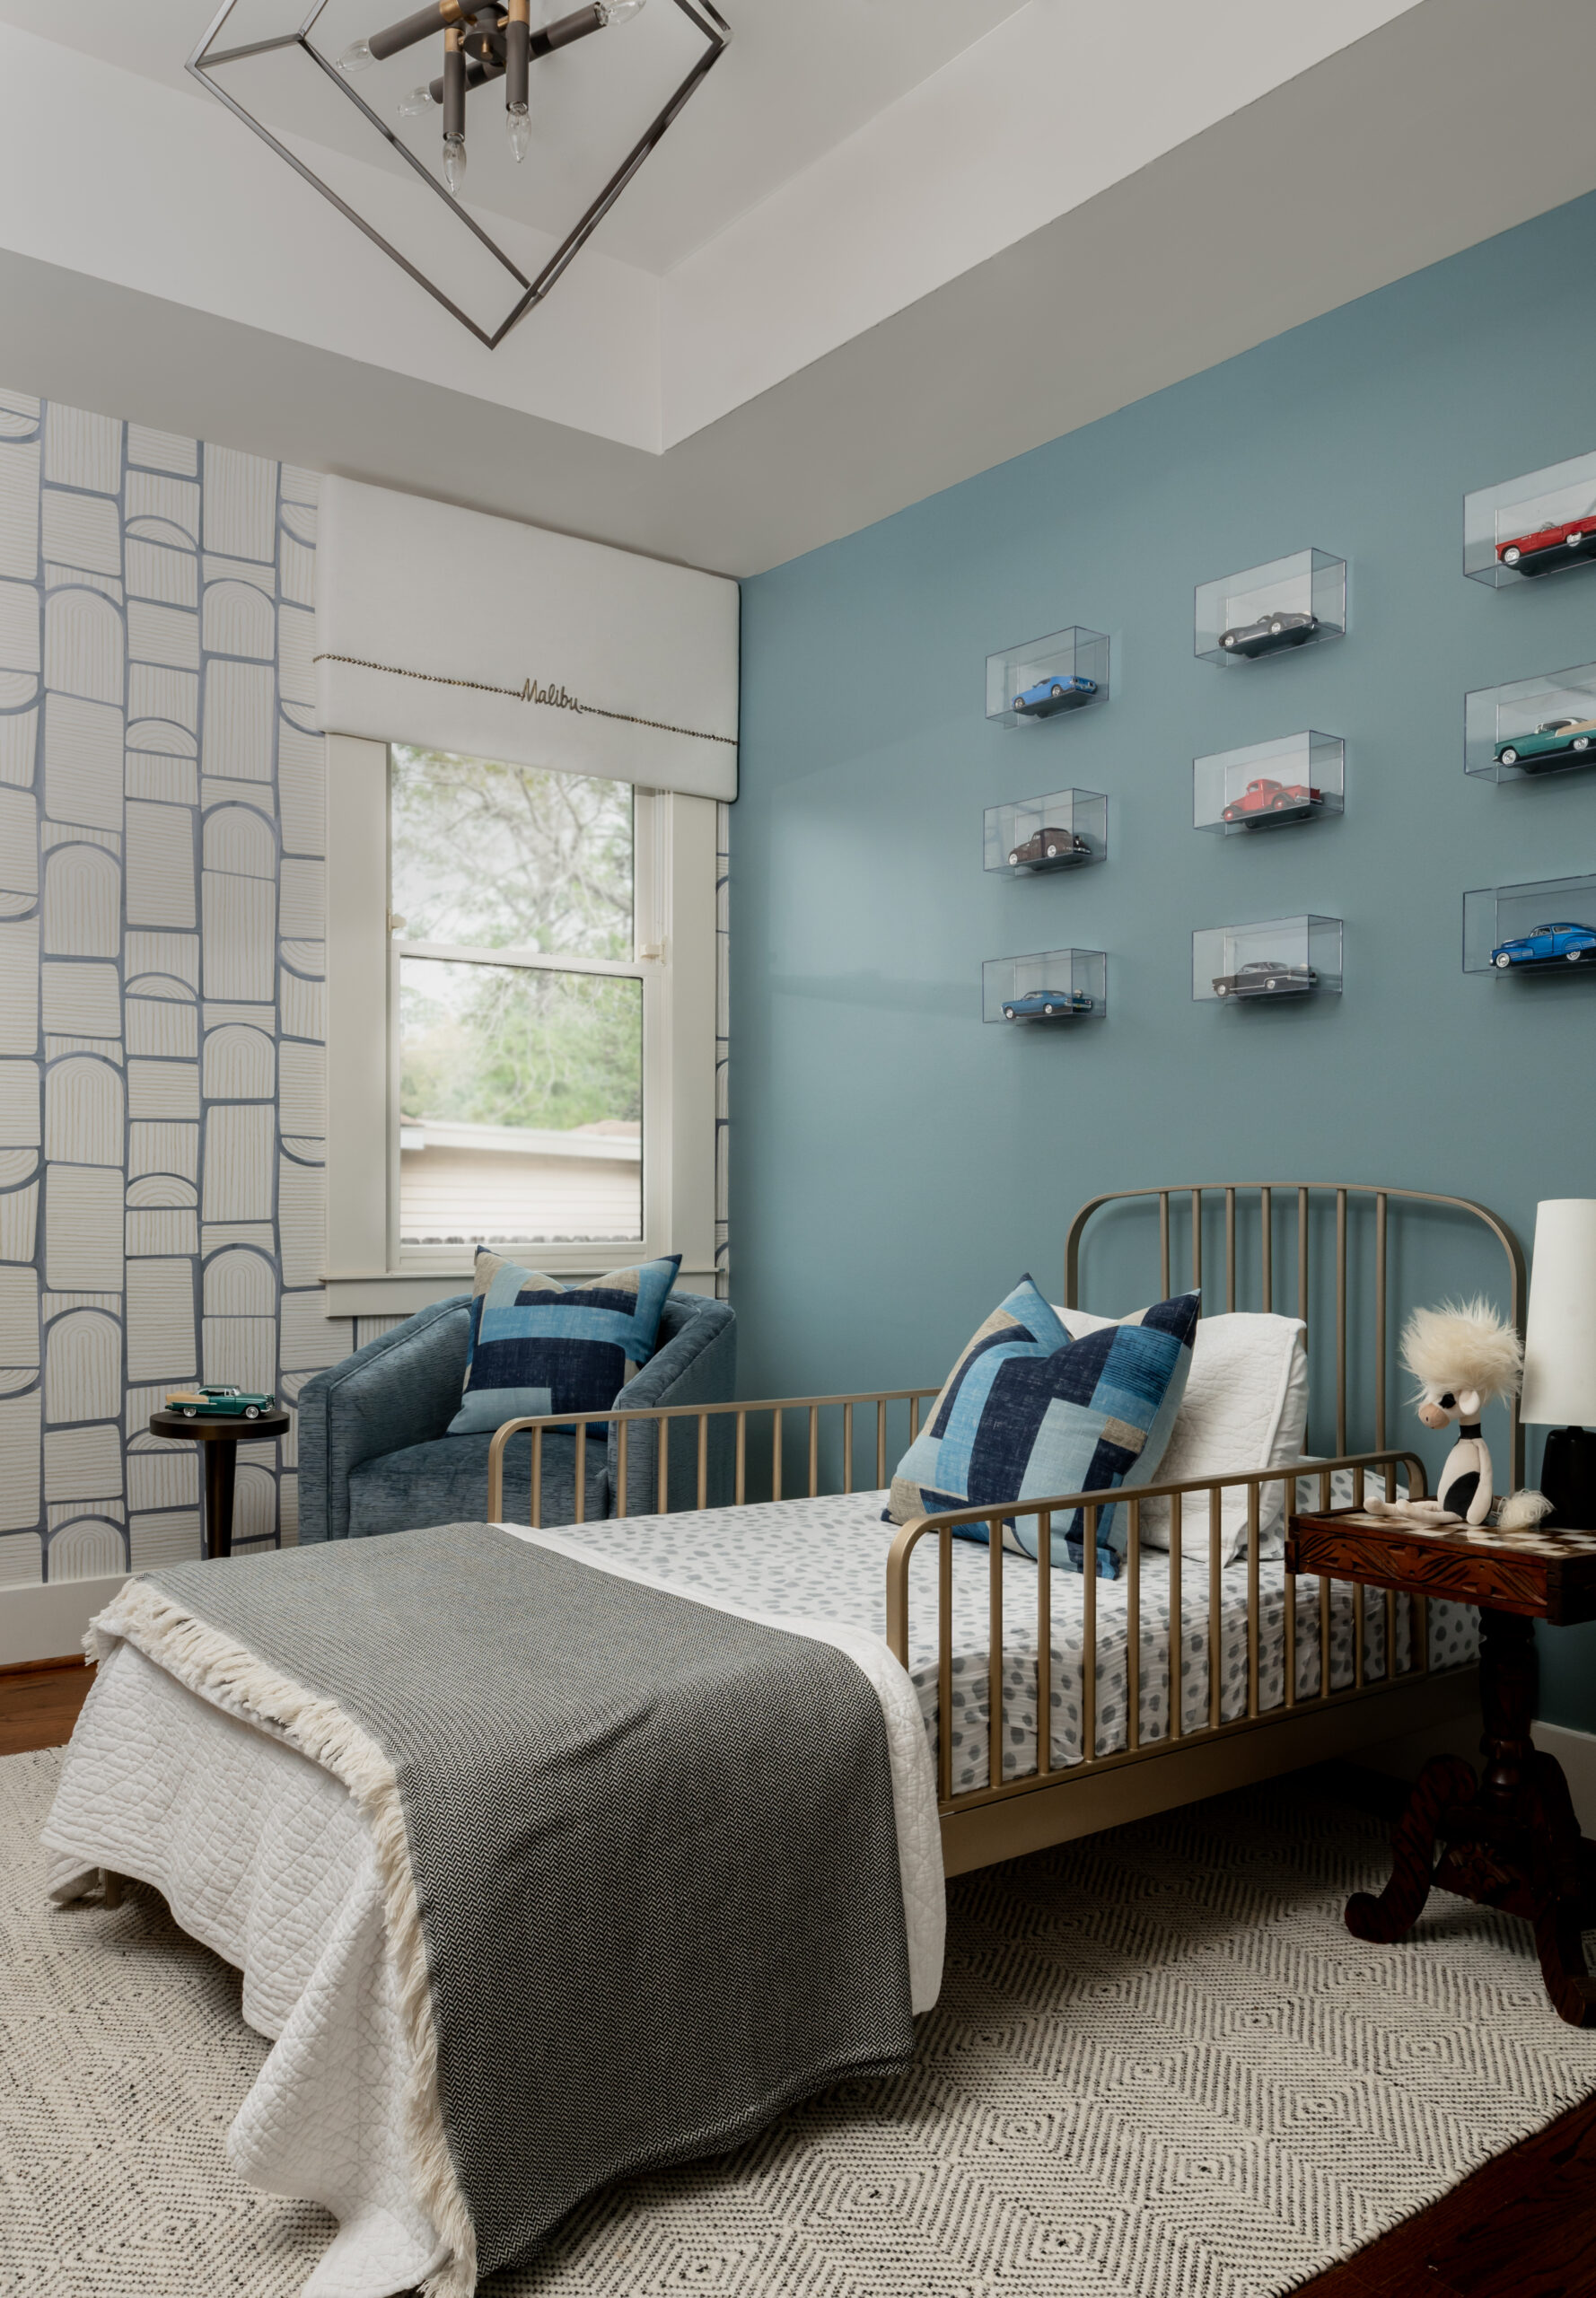 Boys bedroom interior design with car wall art and bed